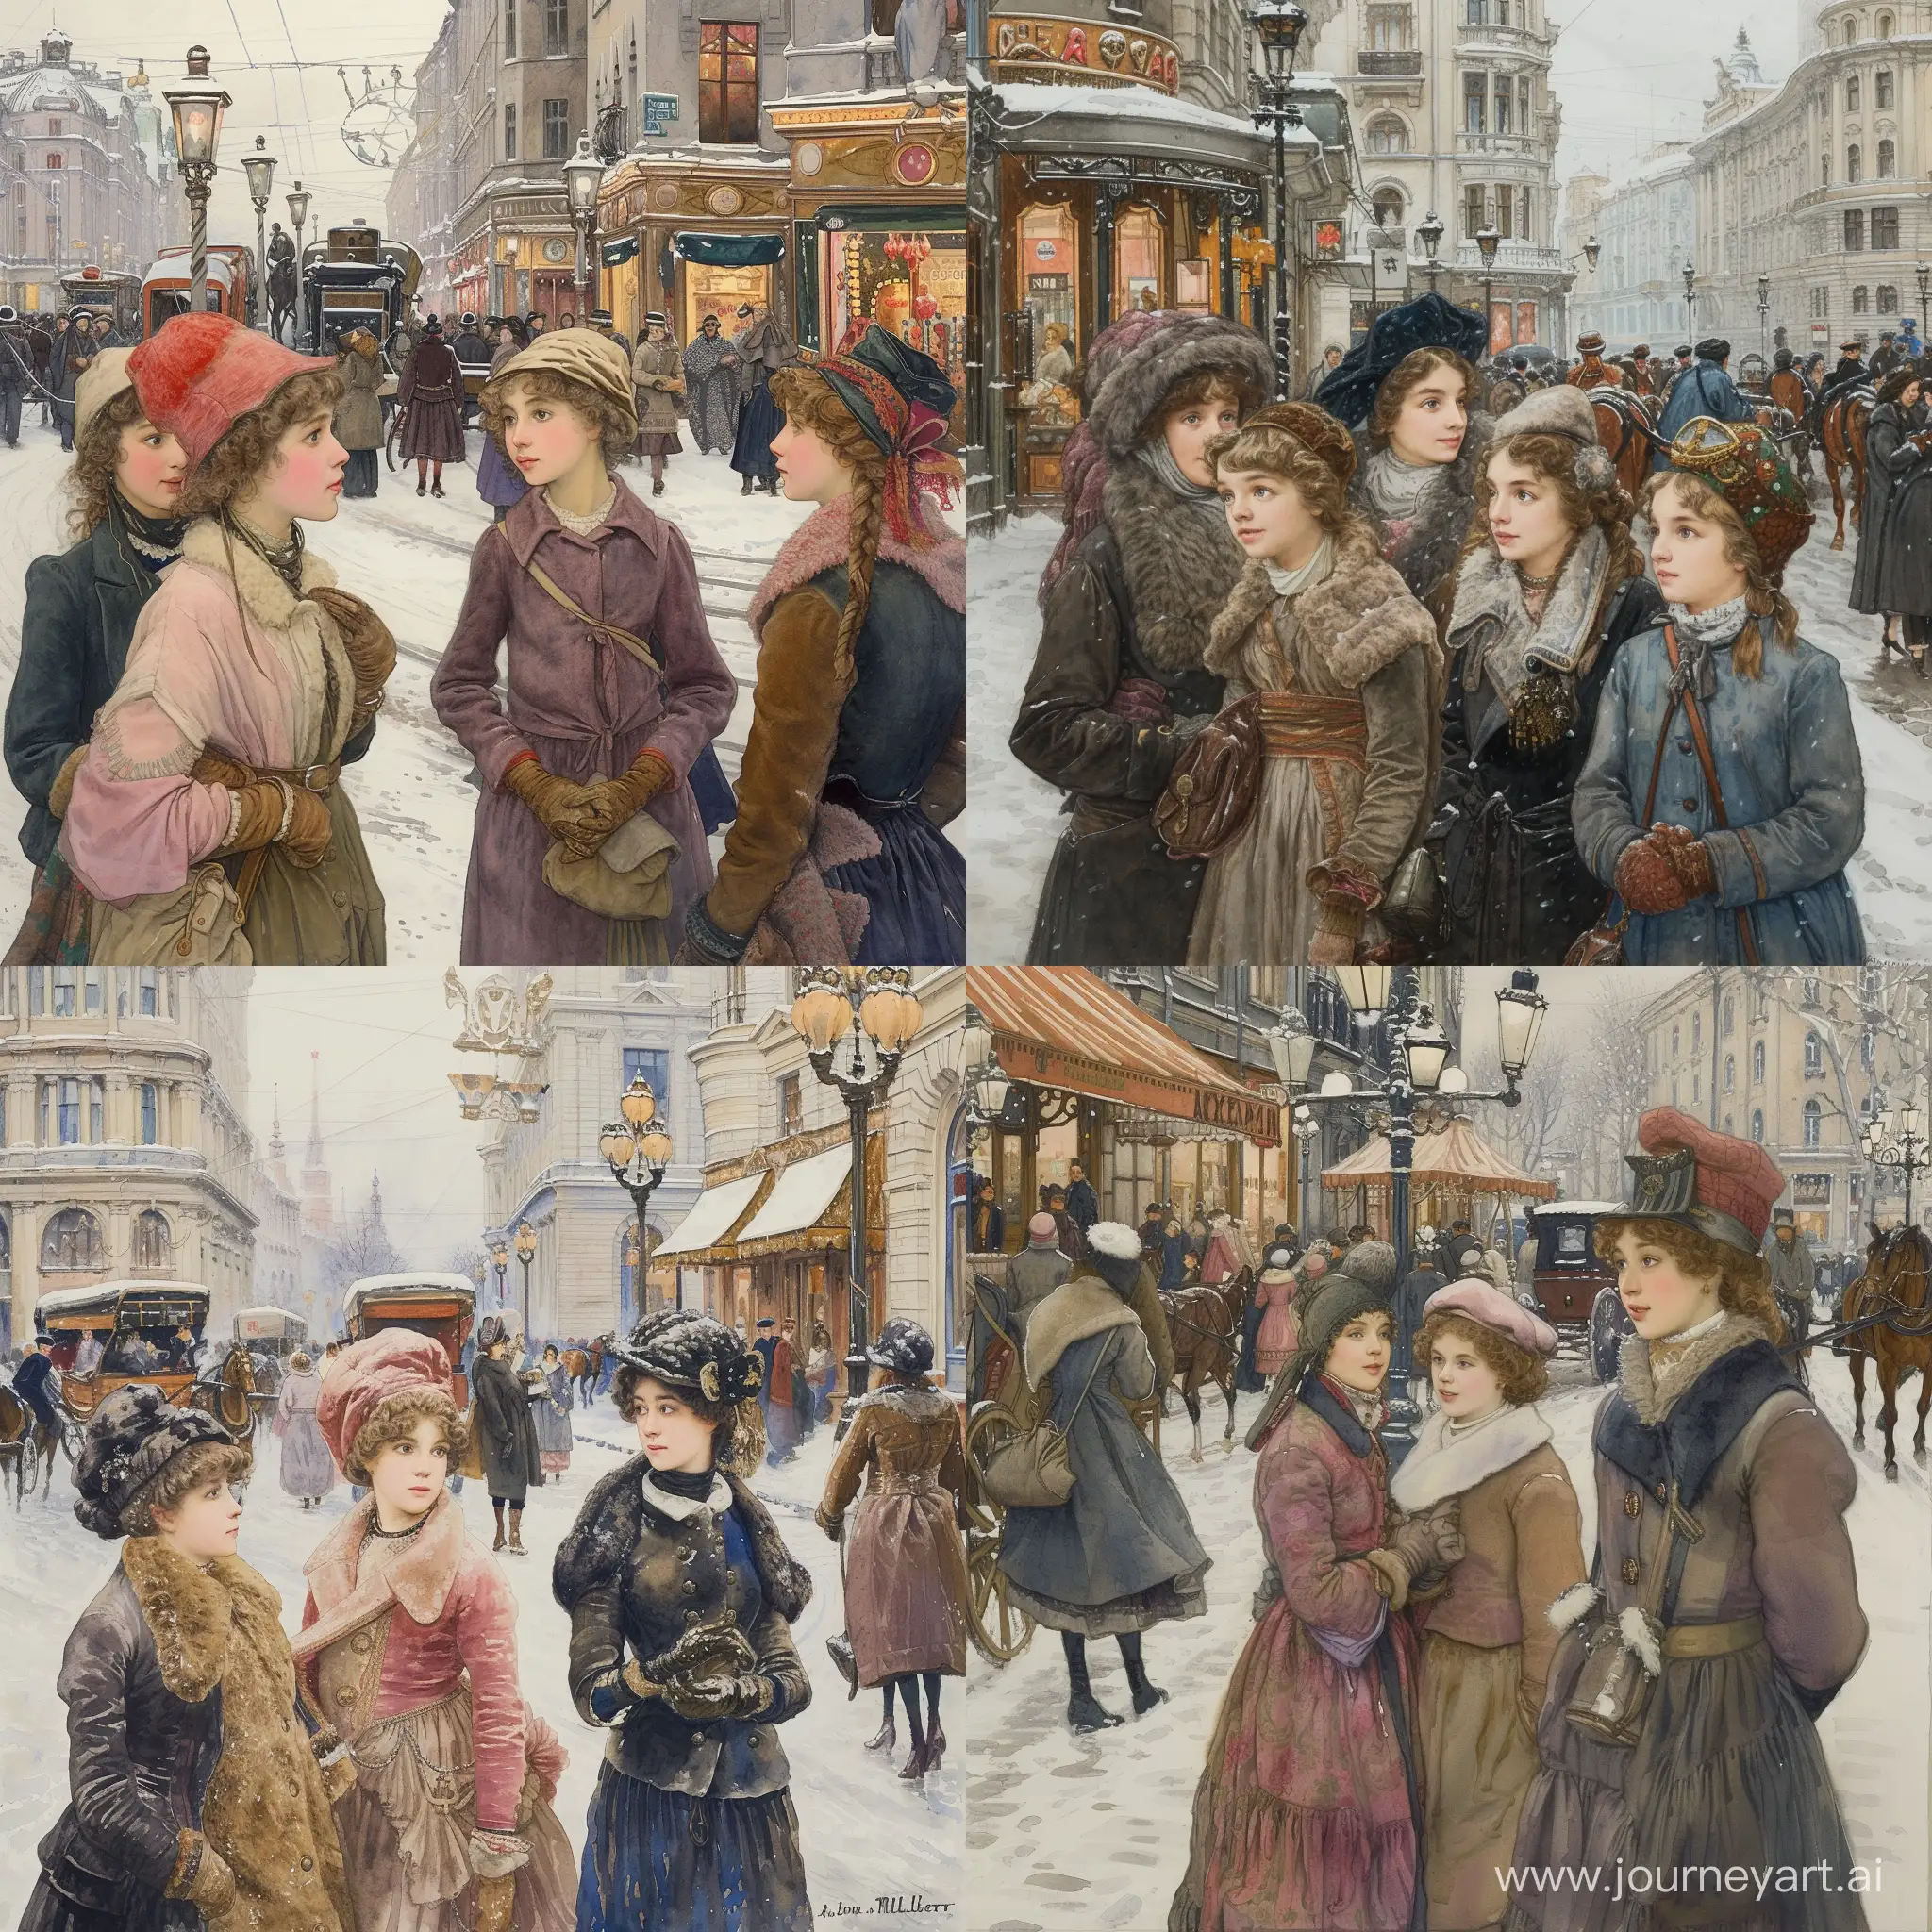 Subject: The central theme of the image is a winter scene in Moskau in 1910, capturing the essence of a busy street Arbat. The focus is on a group of elegant girls, highlighting the fashion and lifestyle of the time. The artist, John Everett Millais, skillfully brings the historic setting to life through his Wathercolor painting. Setting: The background features a bustling street in Moskau during winter, creating a lively atmosphere with people engaging in various activities. The winter setting adds a charming touch, with perhaps snow-covered streets and vintage architecture Arbat. Style/Coloring: Millais employs the classic style of oil painting, using rich and warm colors to evoke the ambiance of the early 20th century. The winter palette may include cool tones like blues and grays, contrasting with the vibrant colors of the girls' clothing. Action: The girls are depicted engaging in daily life activities, suggesting movement and vivacity. Millais captures the dynamic energy of the busy street, enhancing the narrative of the era. Items/Costume: The girls are likely adorned in fashionable clothing of the time, showcasing the trends and styles prevalent in 1910 Moskau. The painting may feature accessories such as hats, gloves, and other period-specific items. Appearance: The characters' appearances are refined and sophisticated, reflecting the societal norms and fashion of the early 20th century. Millais pays attention to detail, emphasizing the unique facial expressions and features of each individual. Accessories: The accessories in the painting, such as street lamps, horse-drawn carriages, and storefronts, contribute to the historical context. These details add depth and authenticity to the overall composition.